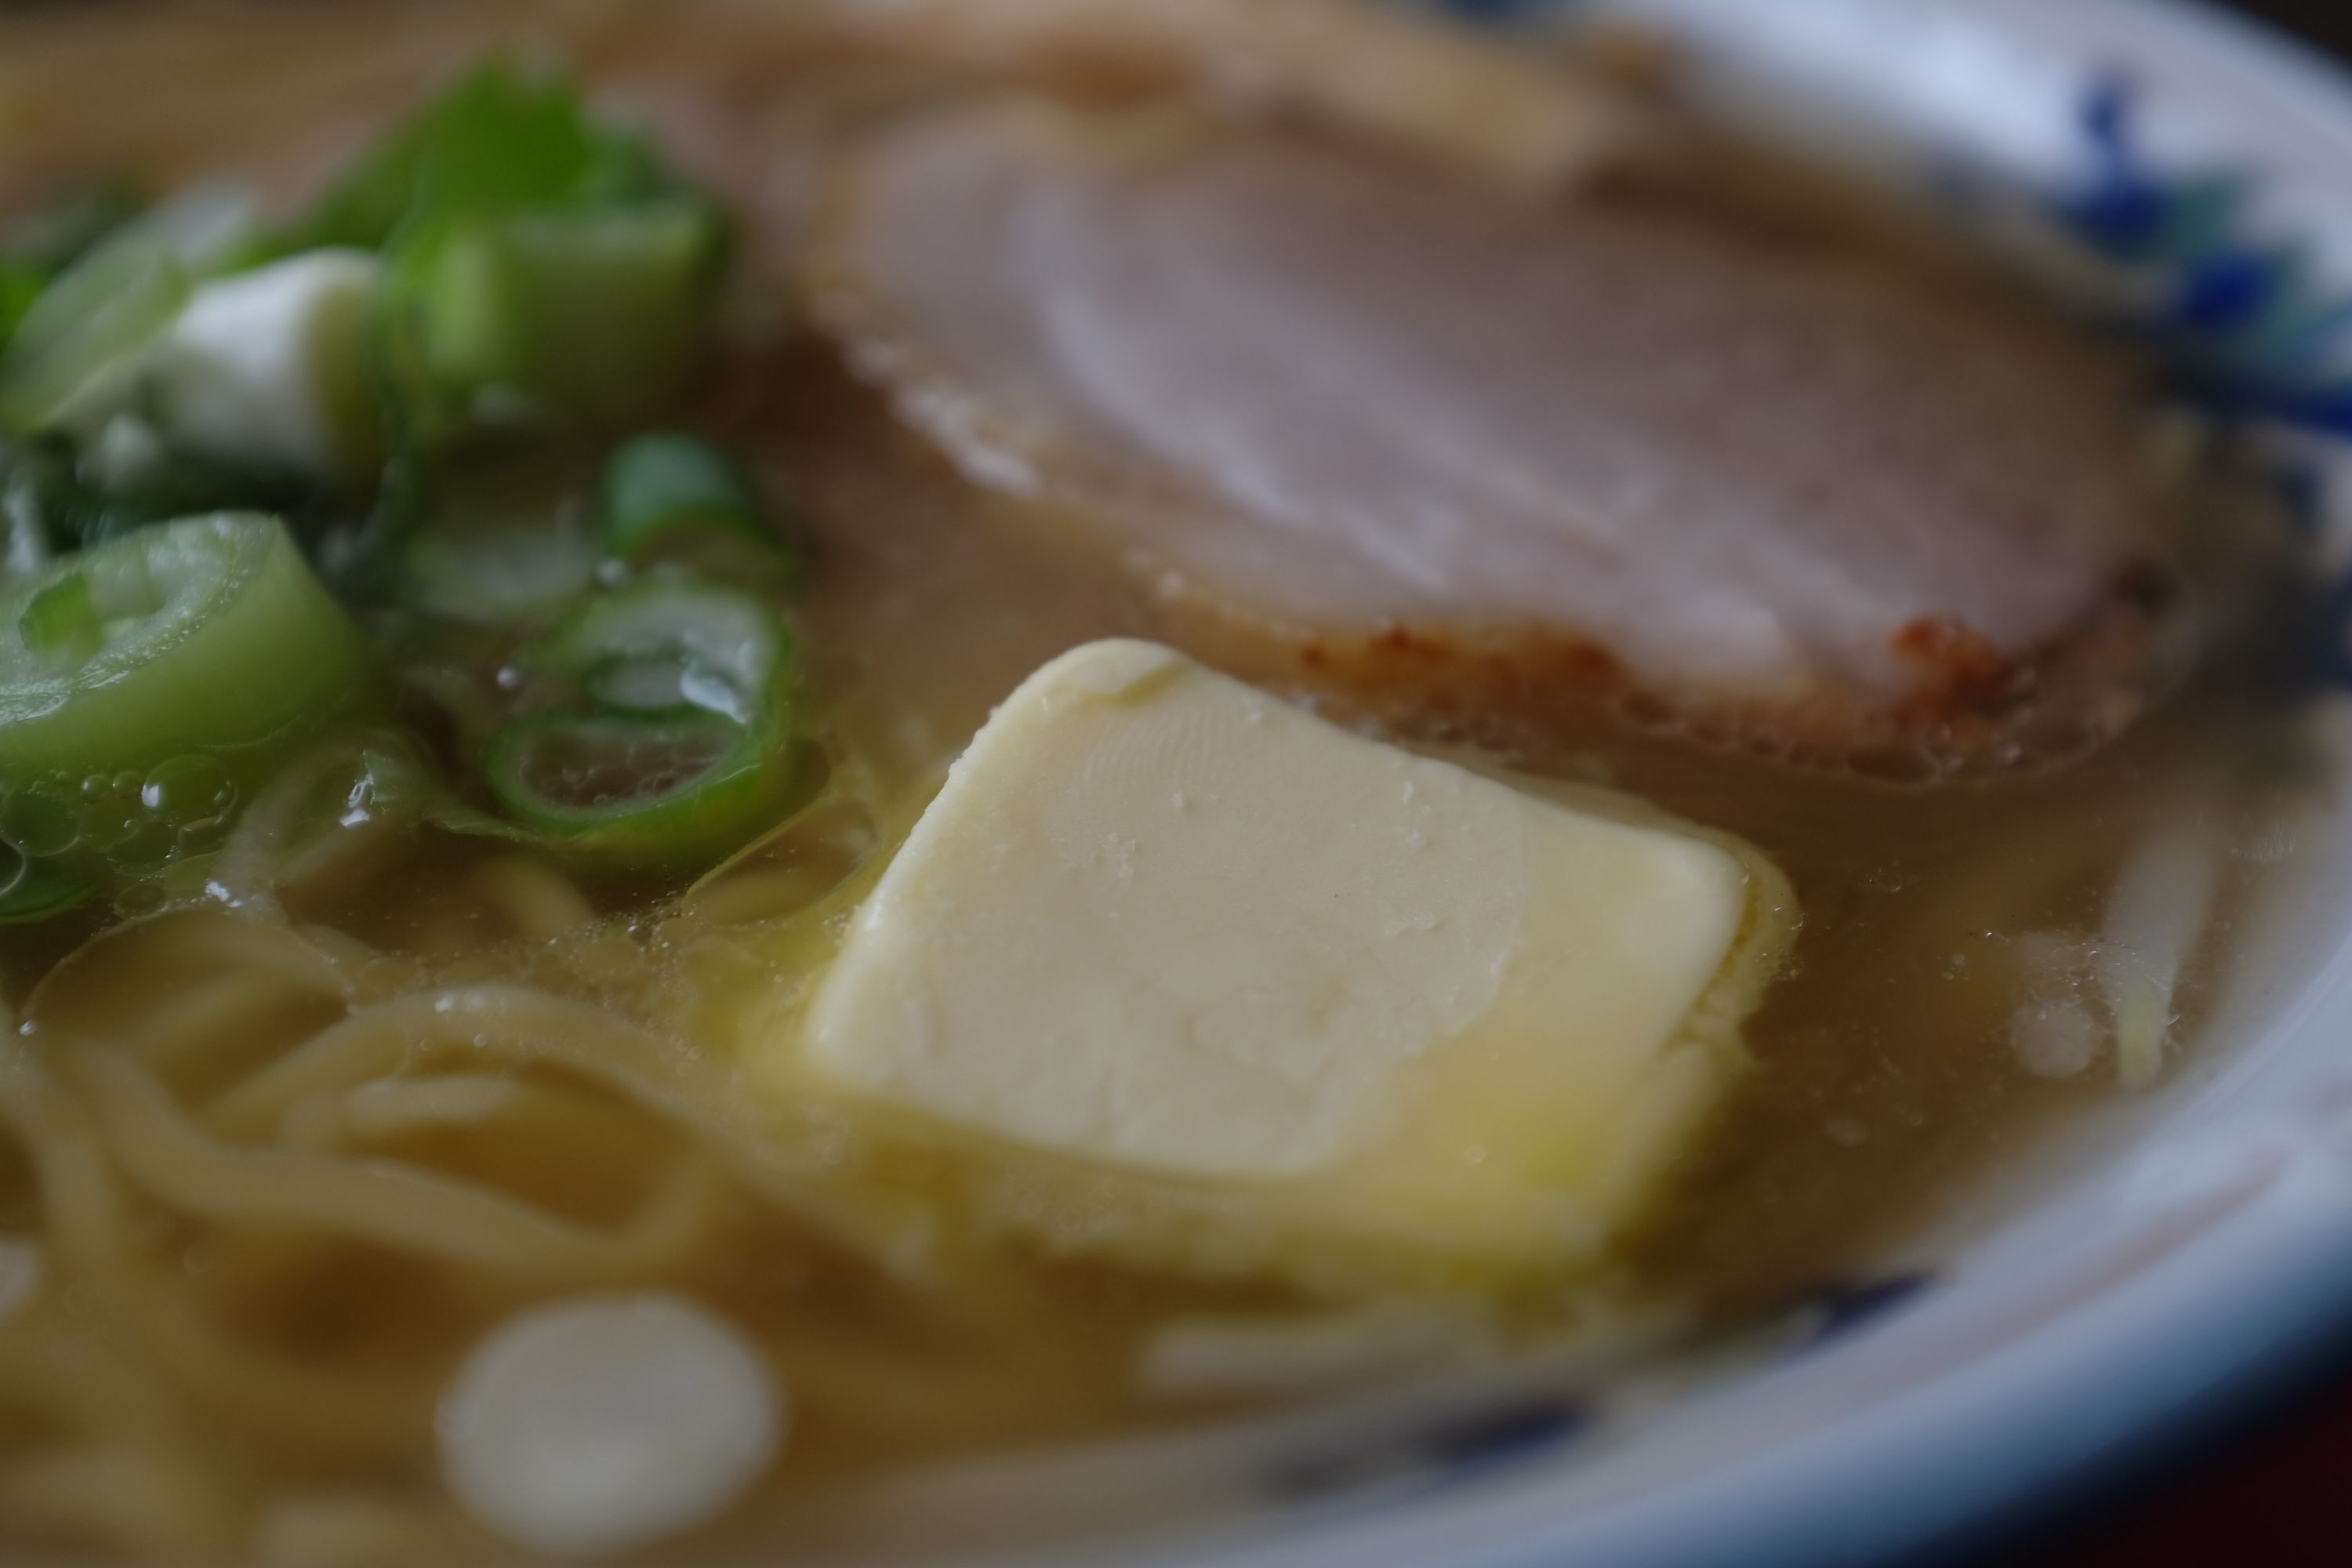 Closeup of a bowl of ramen with a piece of butter showing a human fingerprint in the broth.